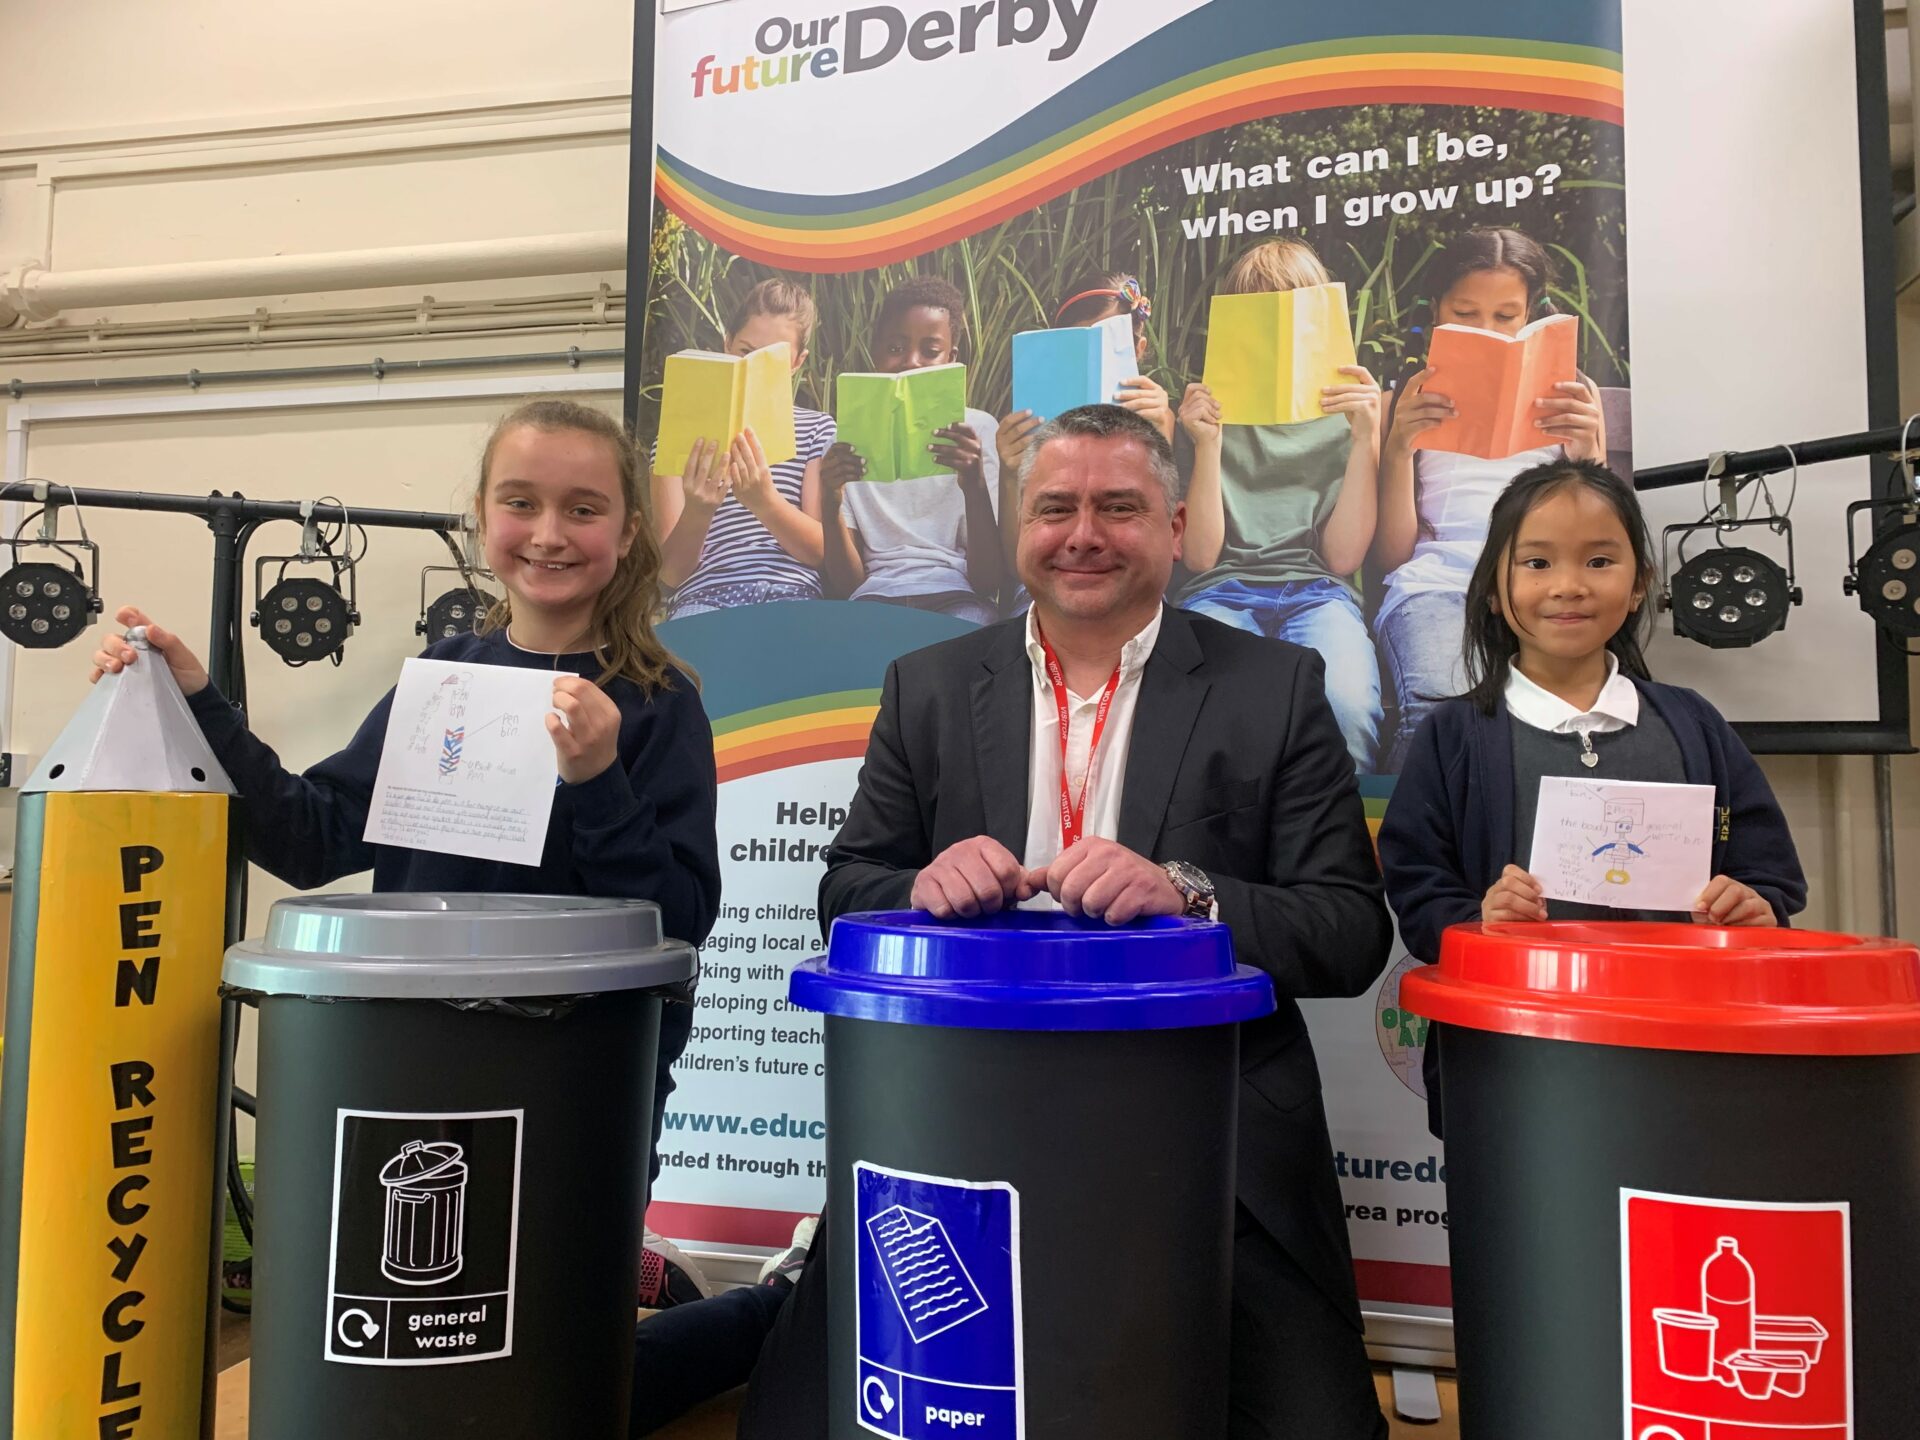 Landau Forte Academy Moorhead pupil Anastasia Kazukina (left) with her winning pen recycling bin. Centre, Dan Read, anaging director of Engineered Learning with Bella, from Landau Forte Academy Moorhead who also took part in the Our Future competition, run by Learn By Design. (Picture: Penguin PR).